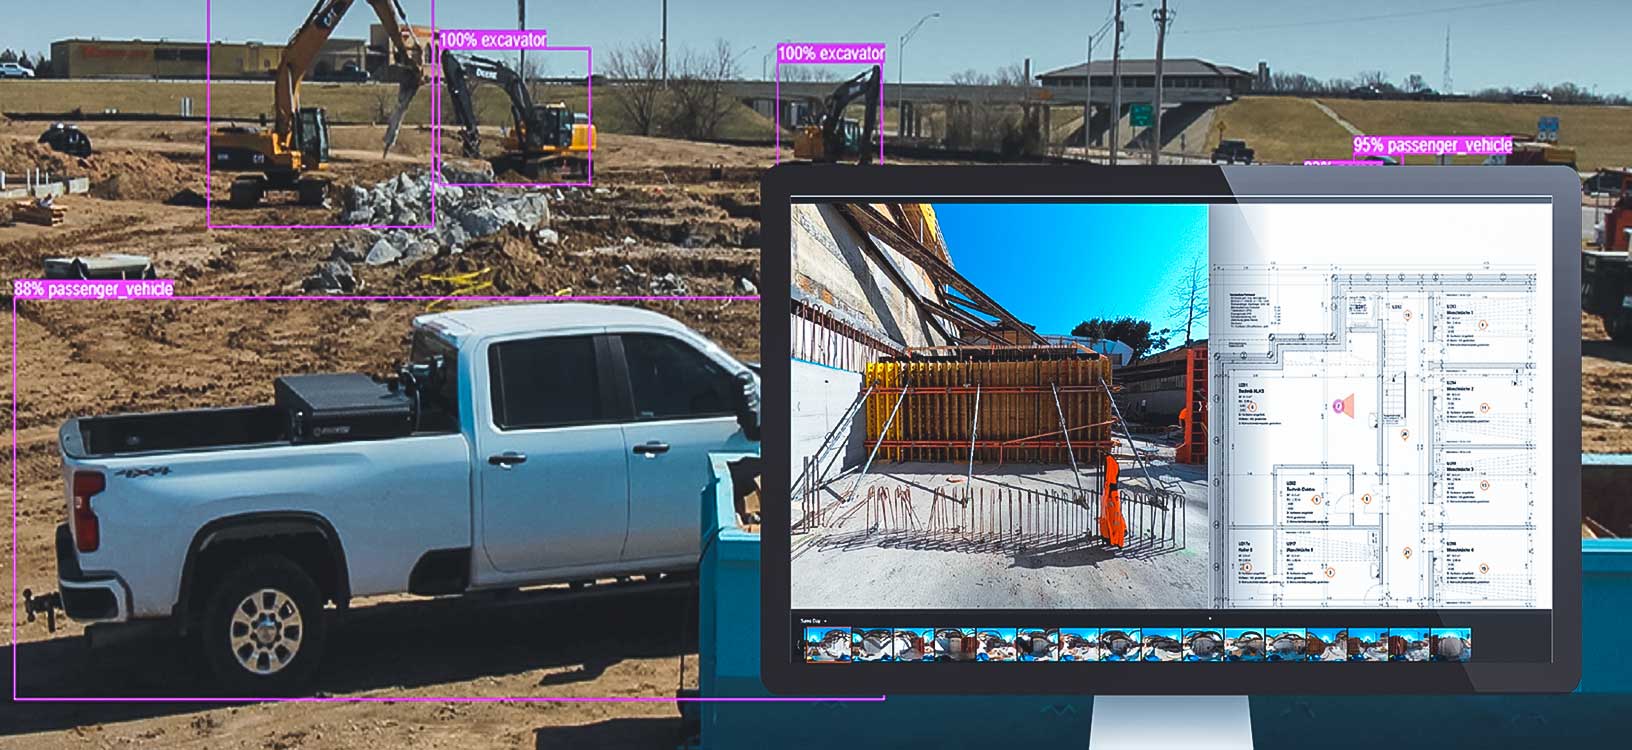 Site control software running at a construction site